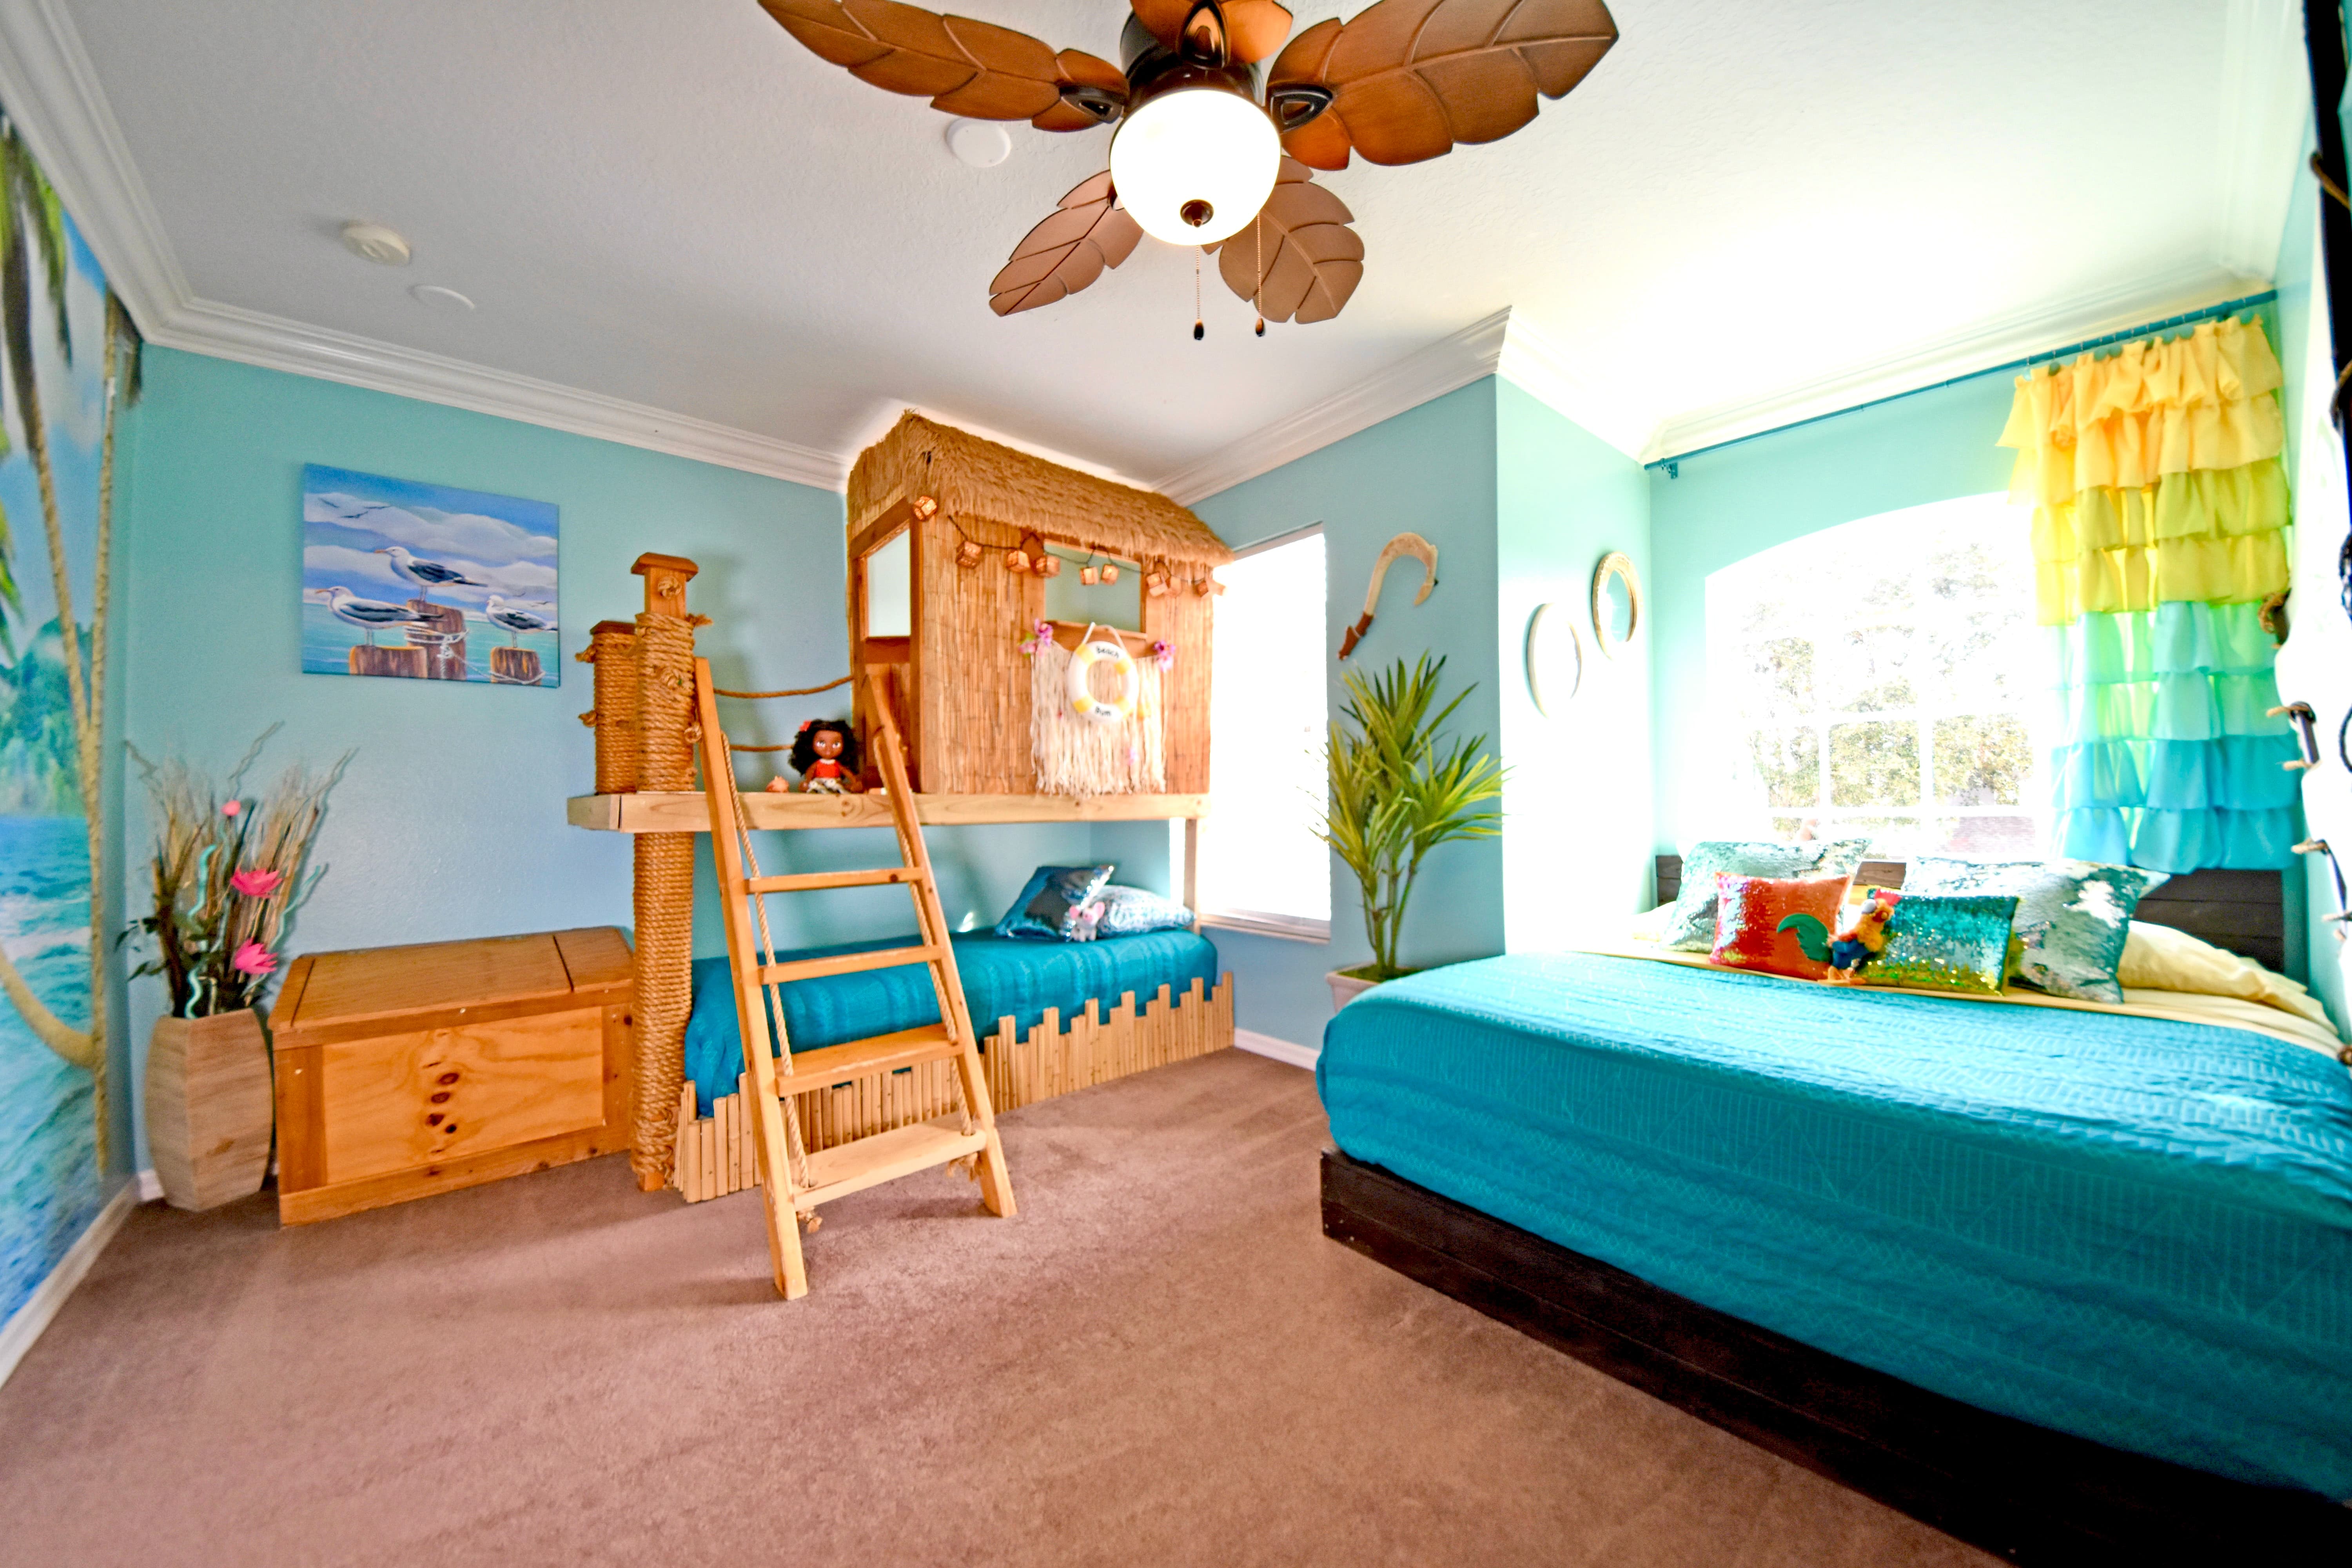 MOANA and Maui's Polynesian Tiki Hut and Boat Bedroom has BOTH a queen- and twin-sized bed, and is a favorite of all ages!  With a jack-n-jill bathroom, young kids are close to mom and dad for nighttime!